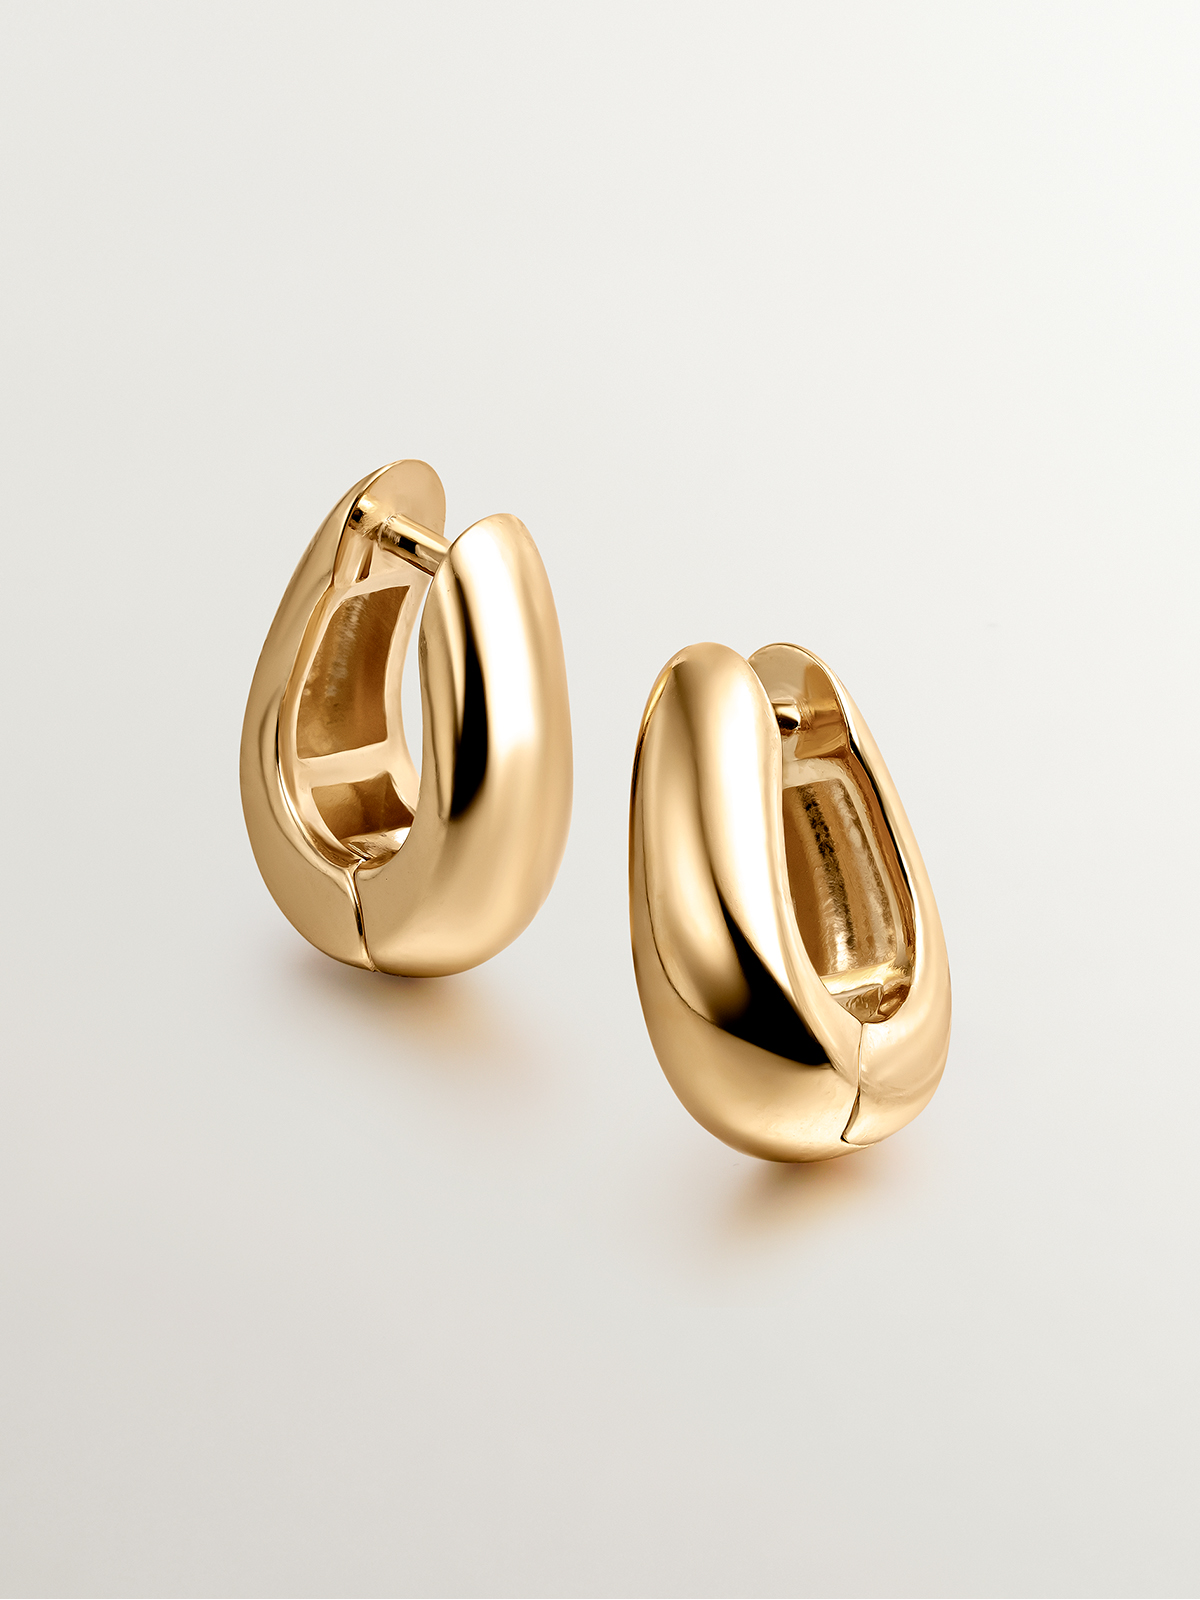 Medium thick 925 silver hoop earrings bathed in 18K yellow gold with an oval shape.